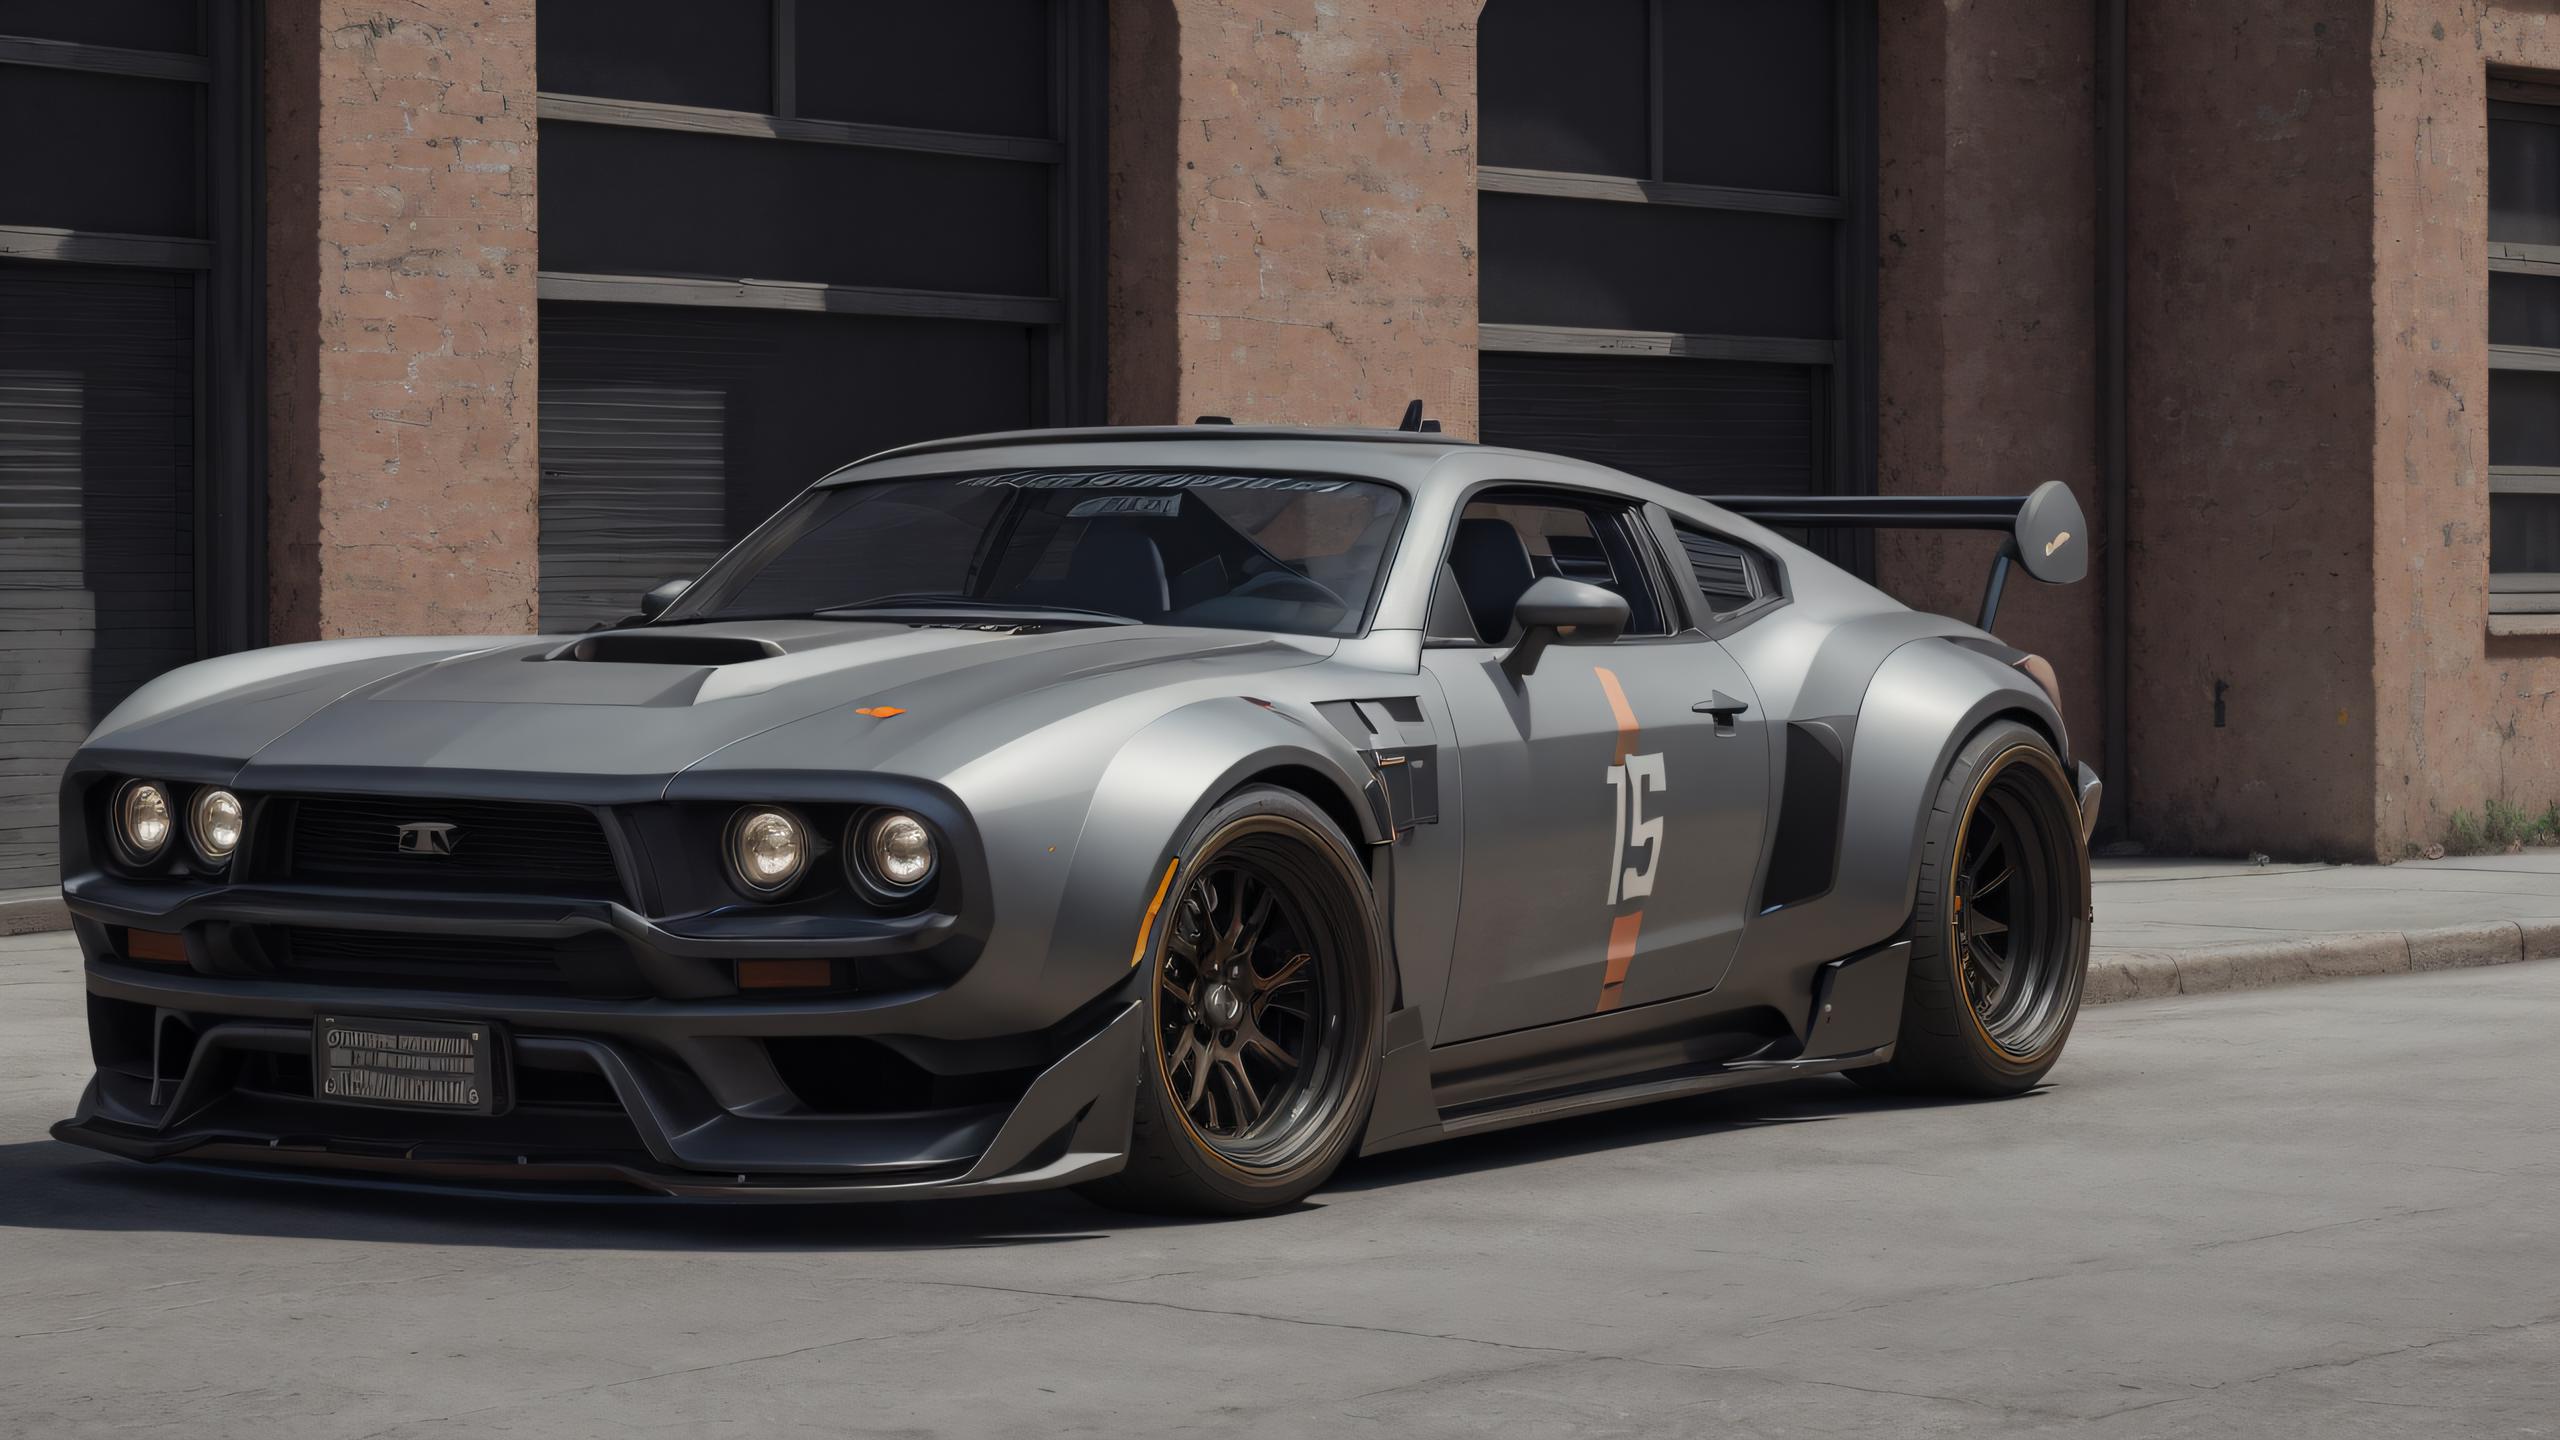 Badass Cars image by thedarkside123